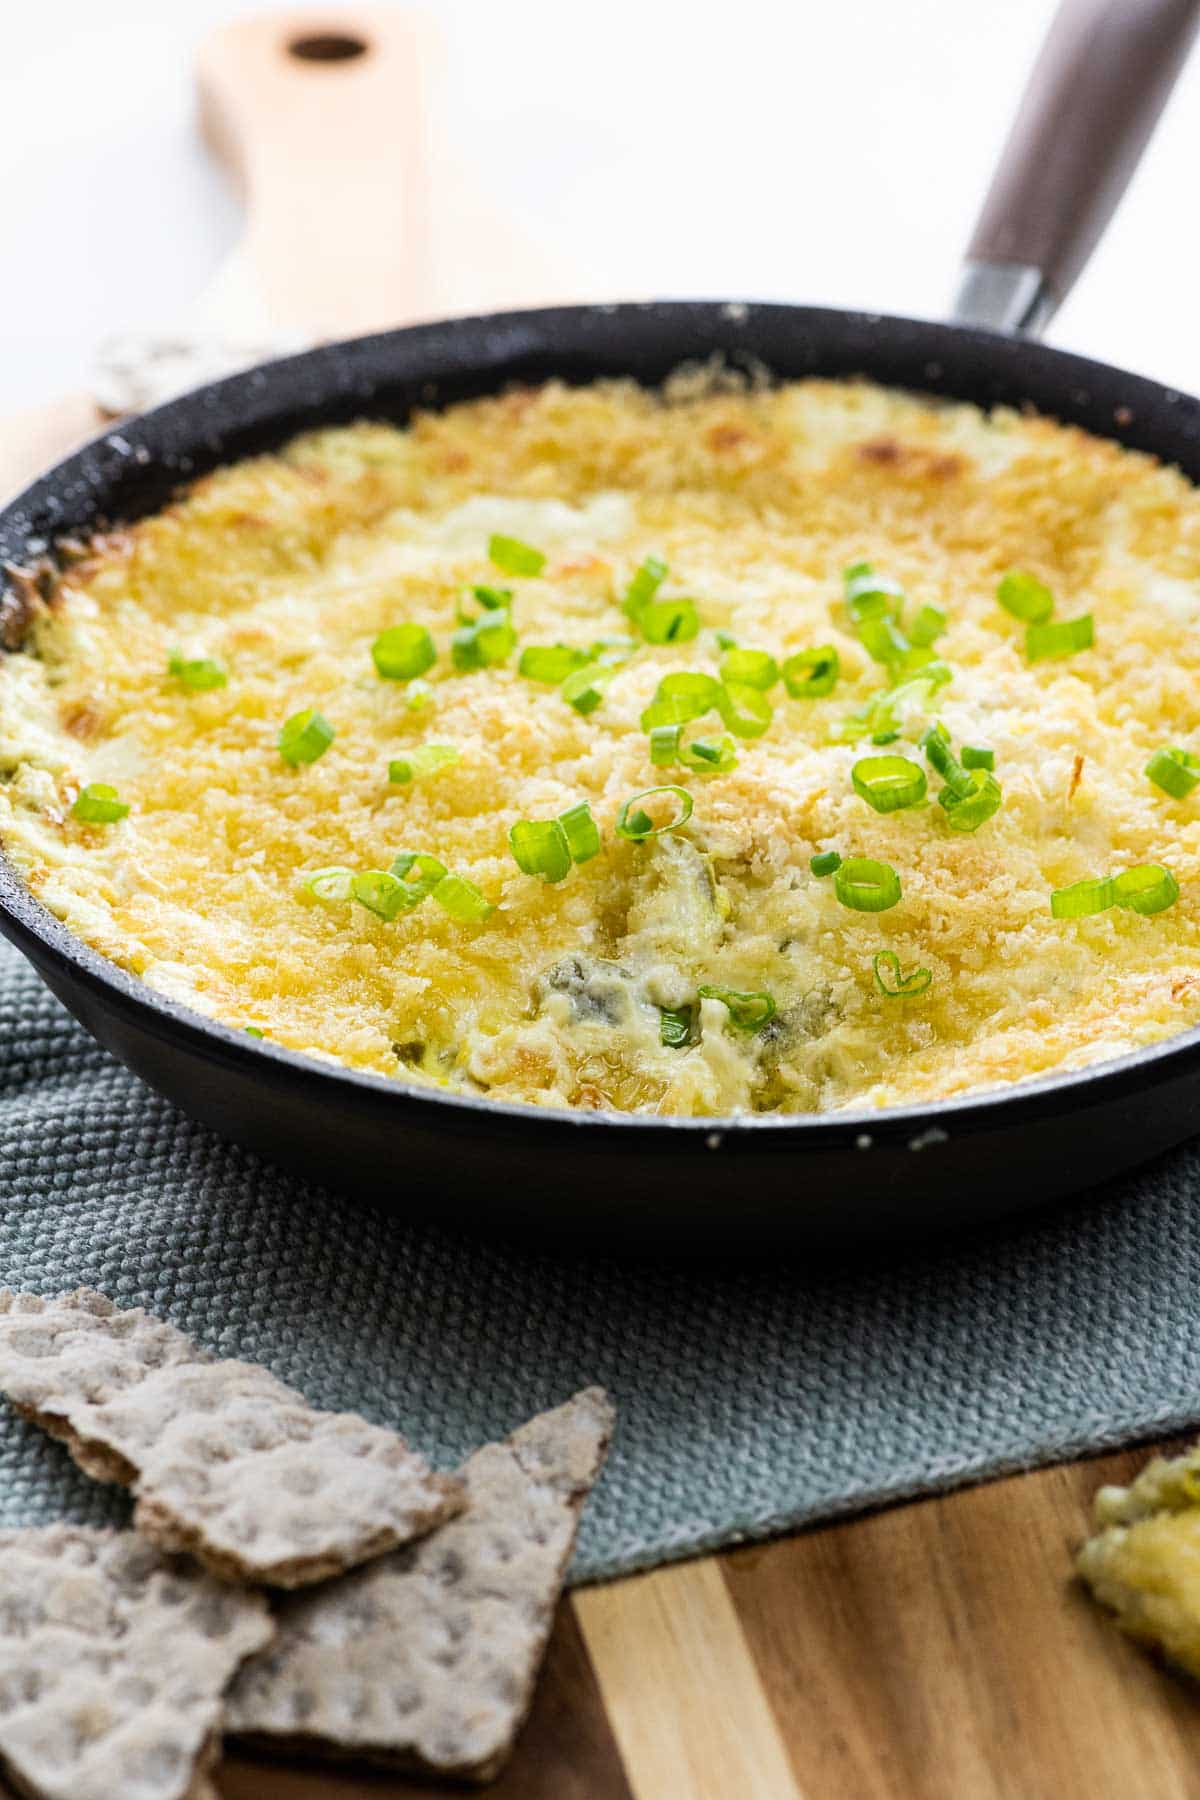 popper dip (jalapeno dip with cream cheese and panko) in a skillet with crackers